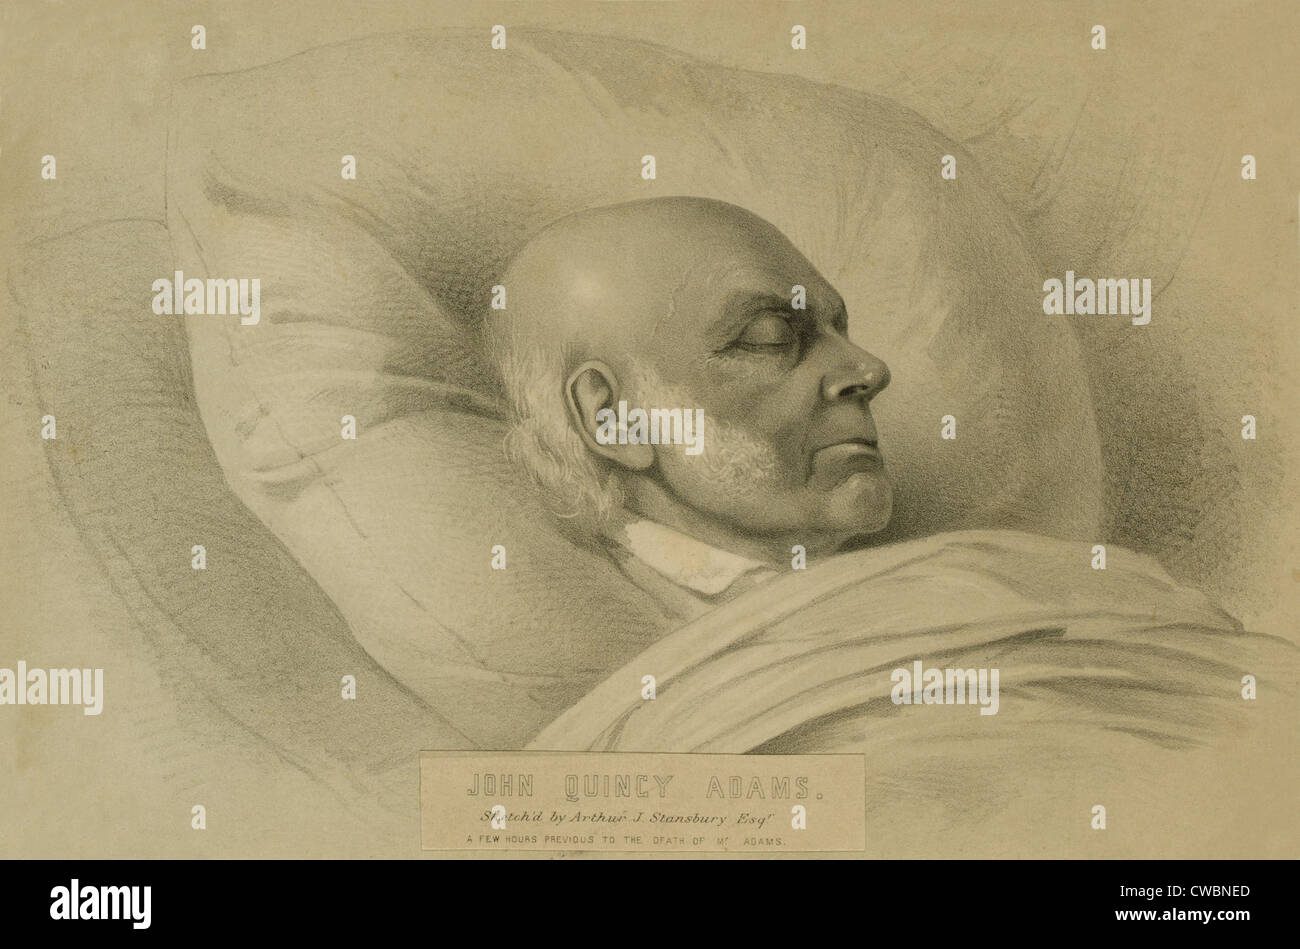 John Quincy Adams (1767-1848), a few hours previous to death as he lay unconscious in the Rotunda after suffering a stroke. Stock Photo